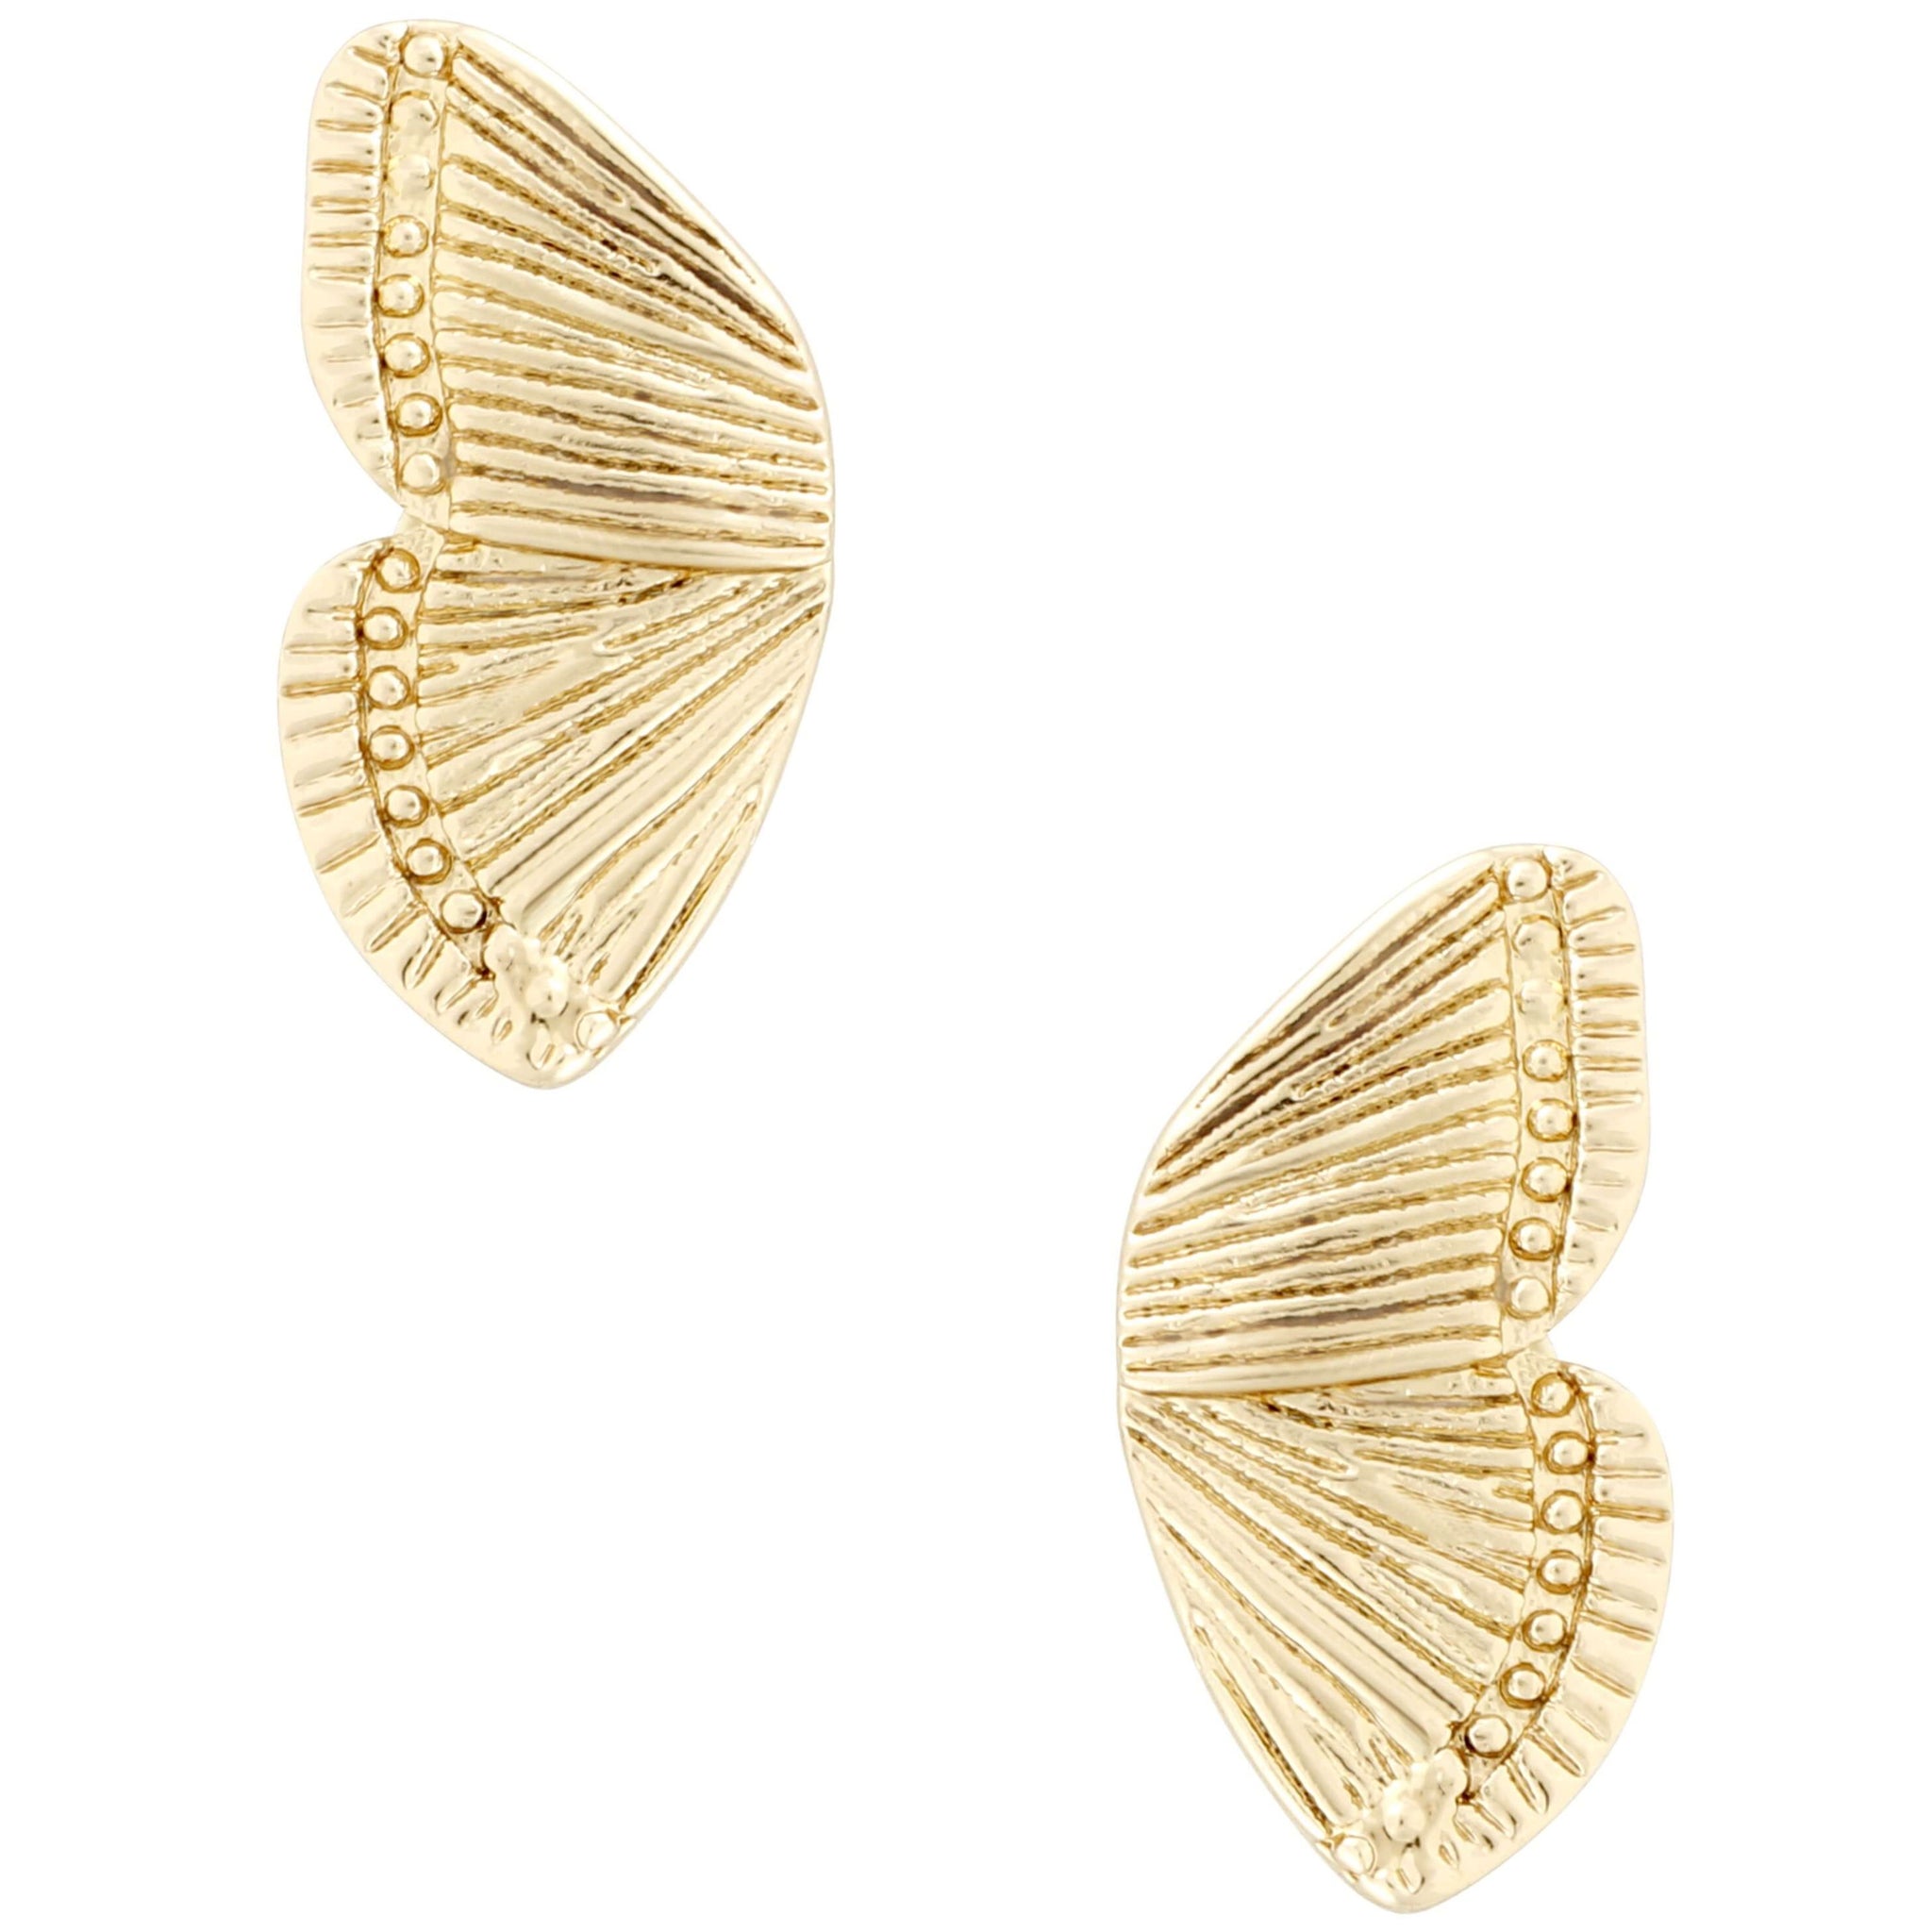 Butterfly wing pair of earrings. 14k gold plated with brass base and surgical steel posts or sterling silver.